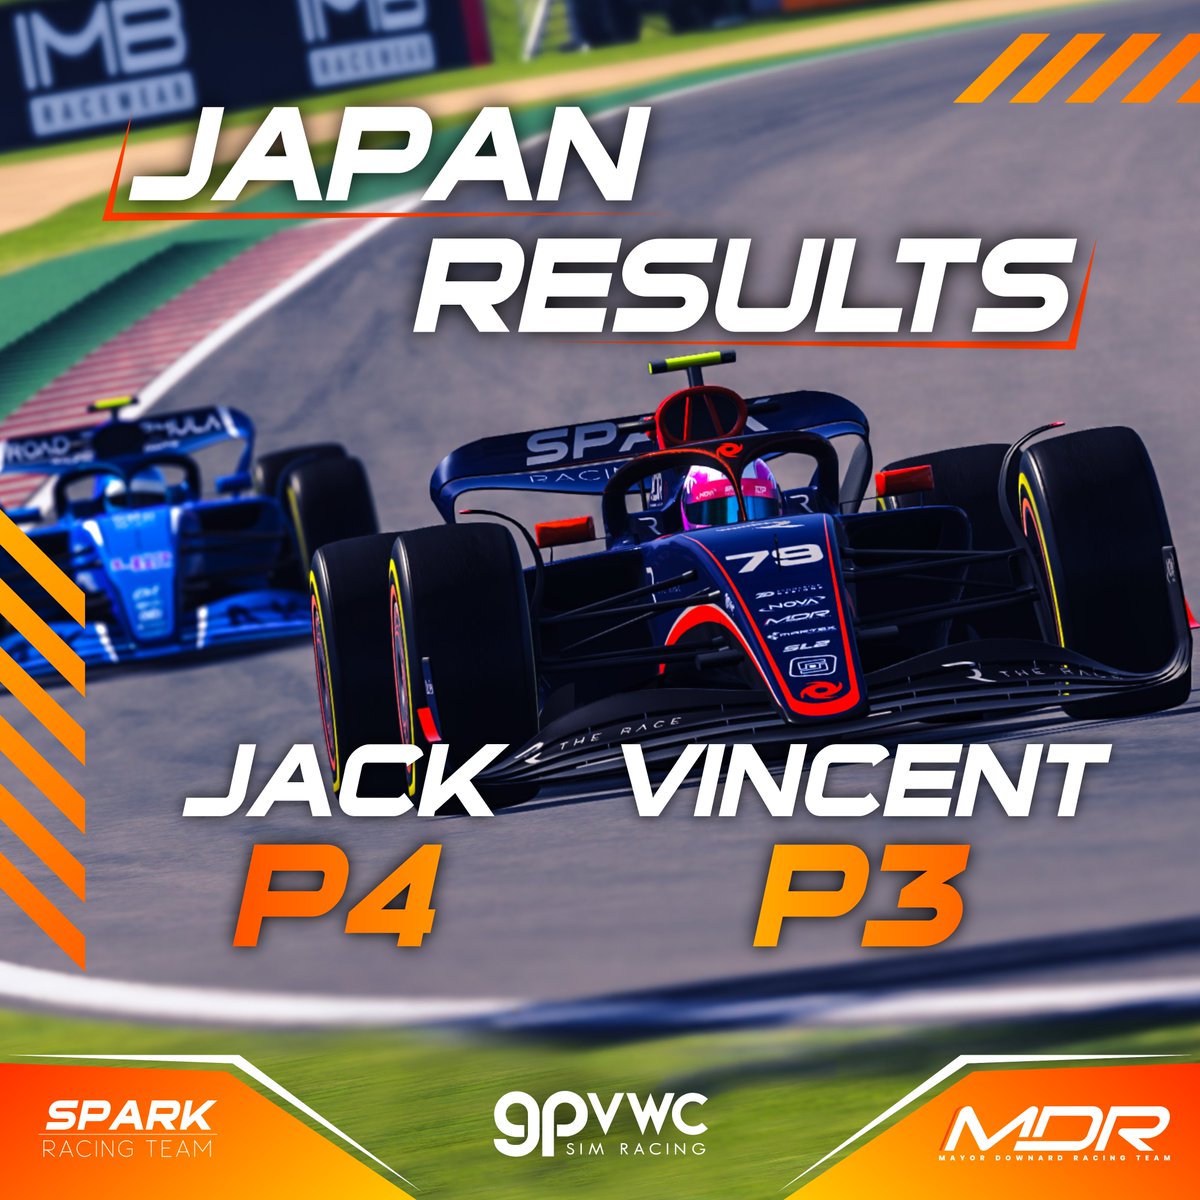 Vincent secured the final podium position after Alex and Jack unfortunately collided in front of him. #gpvwc #SL2 #simracing #esports #JapaneseGP #top